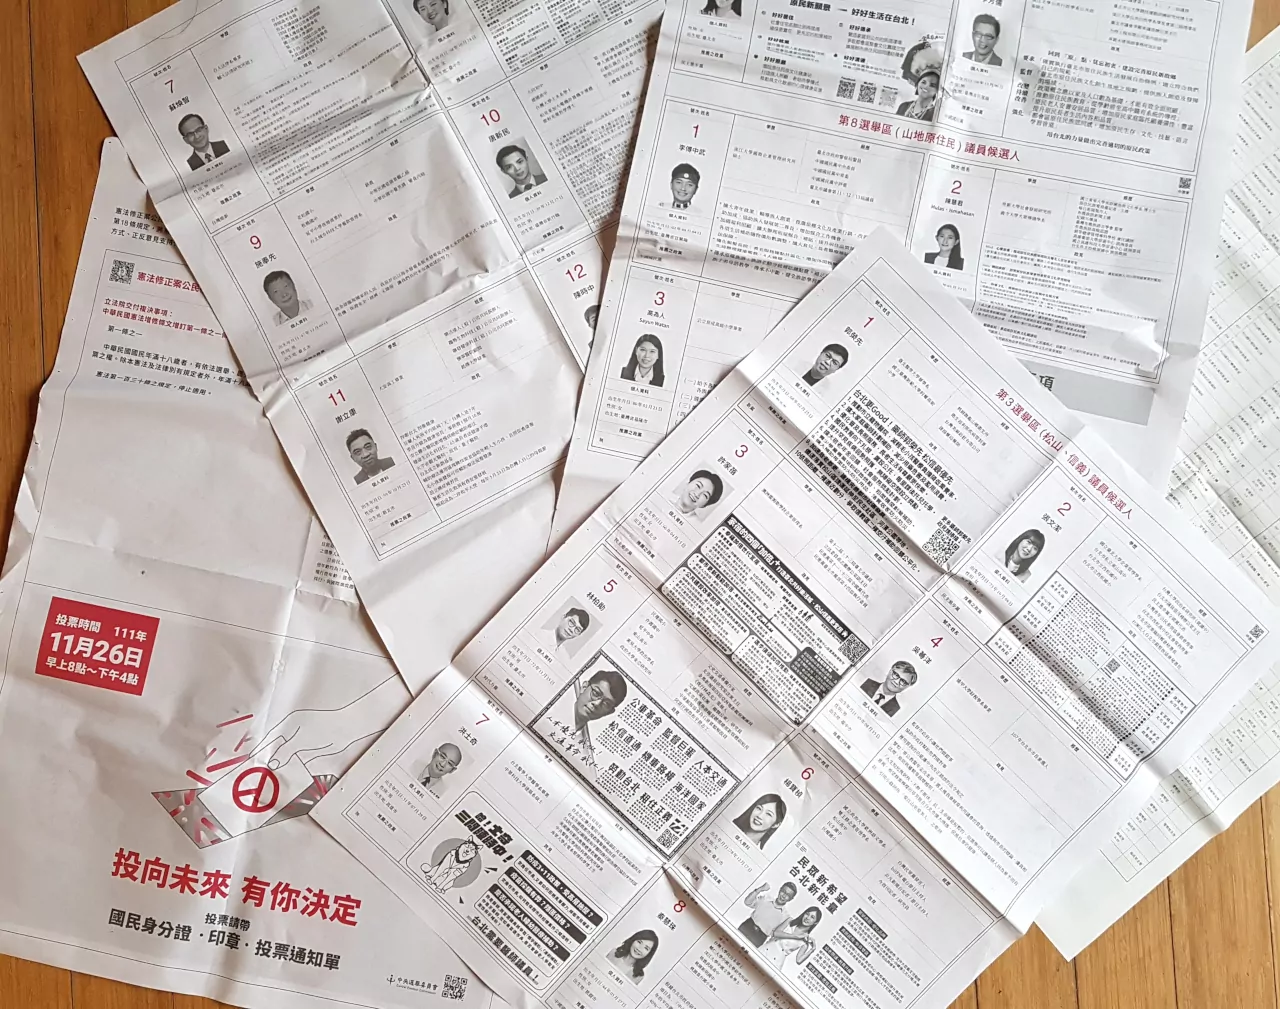 Bulletins for the 2022 Taiwanese local elections spread over the floor